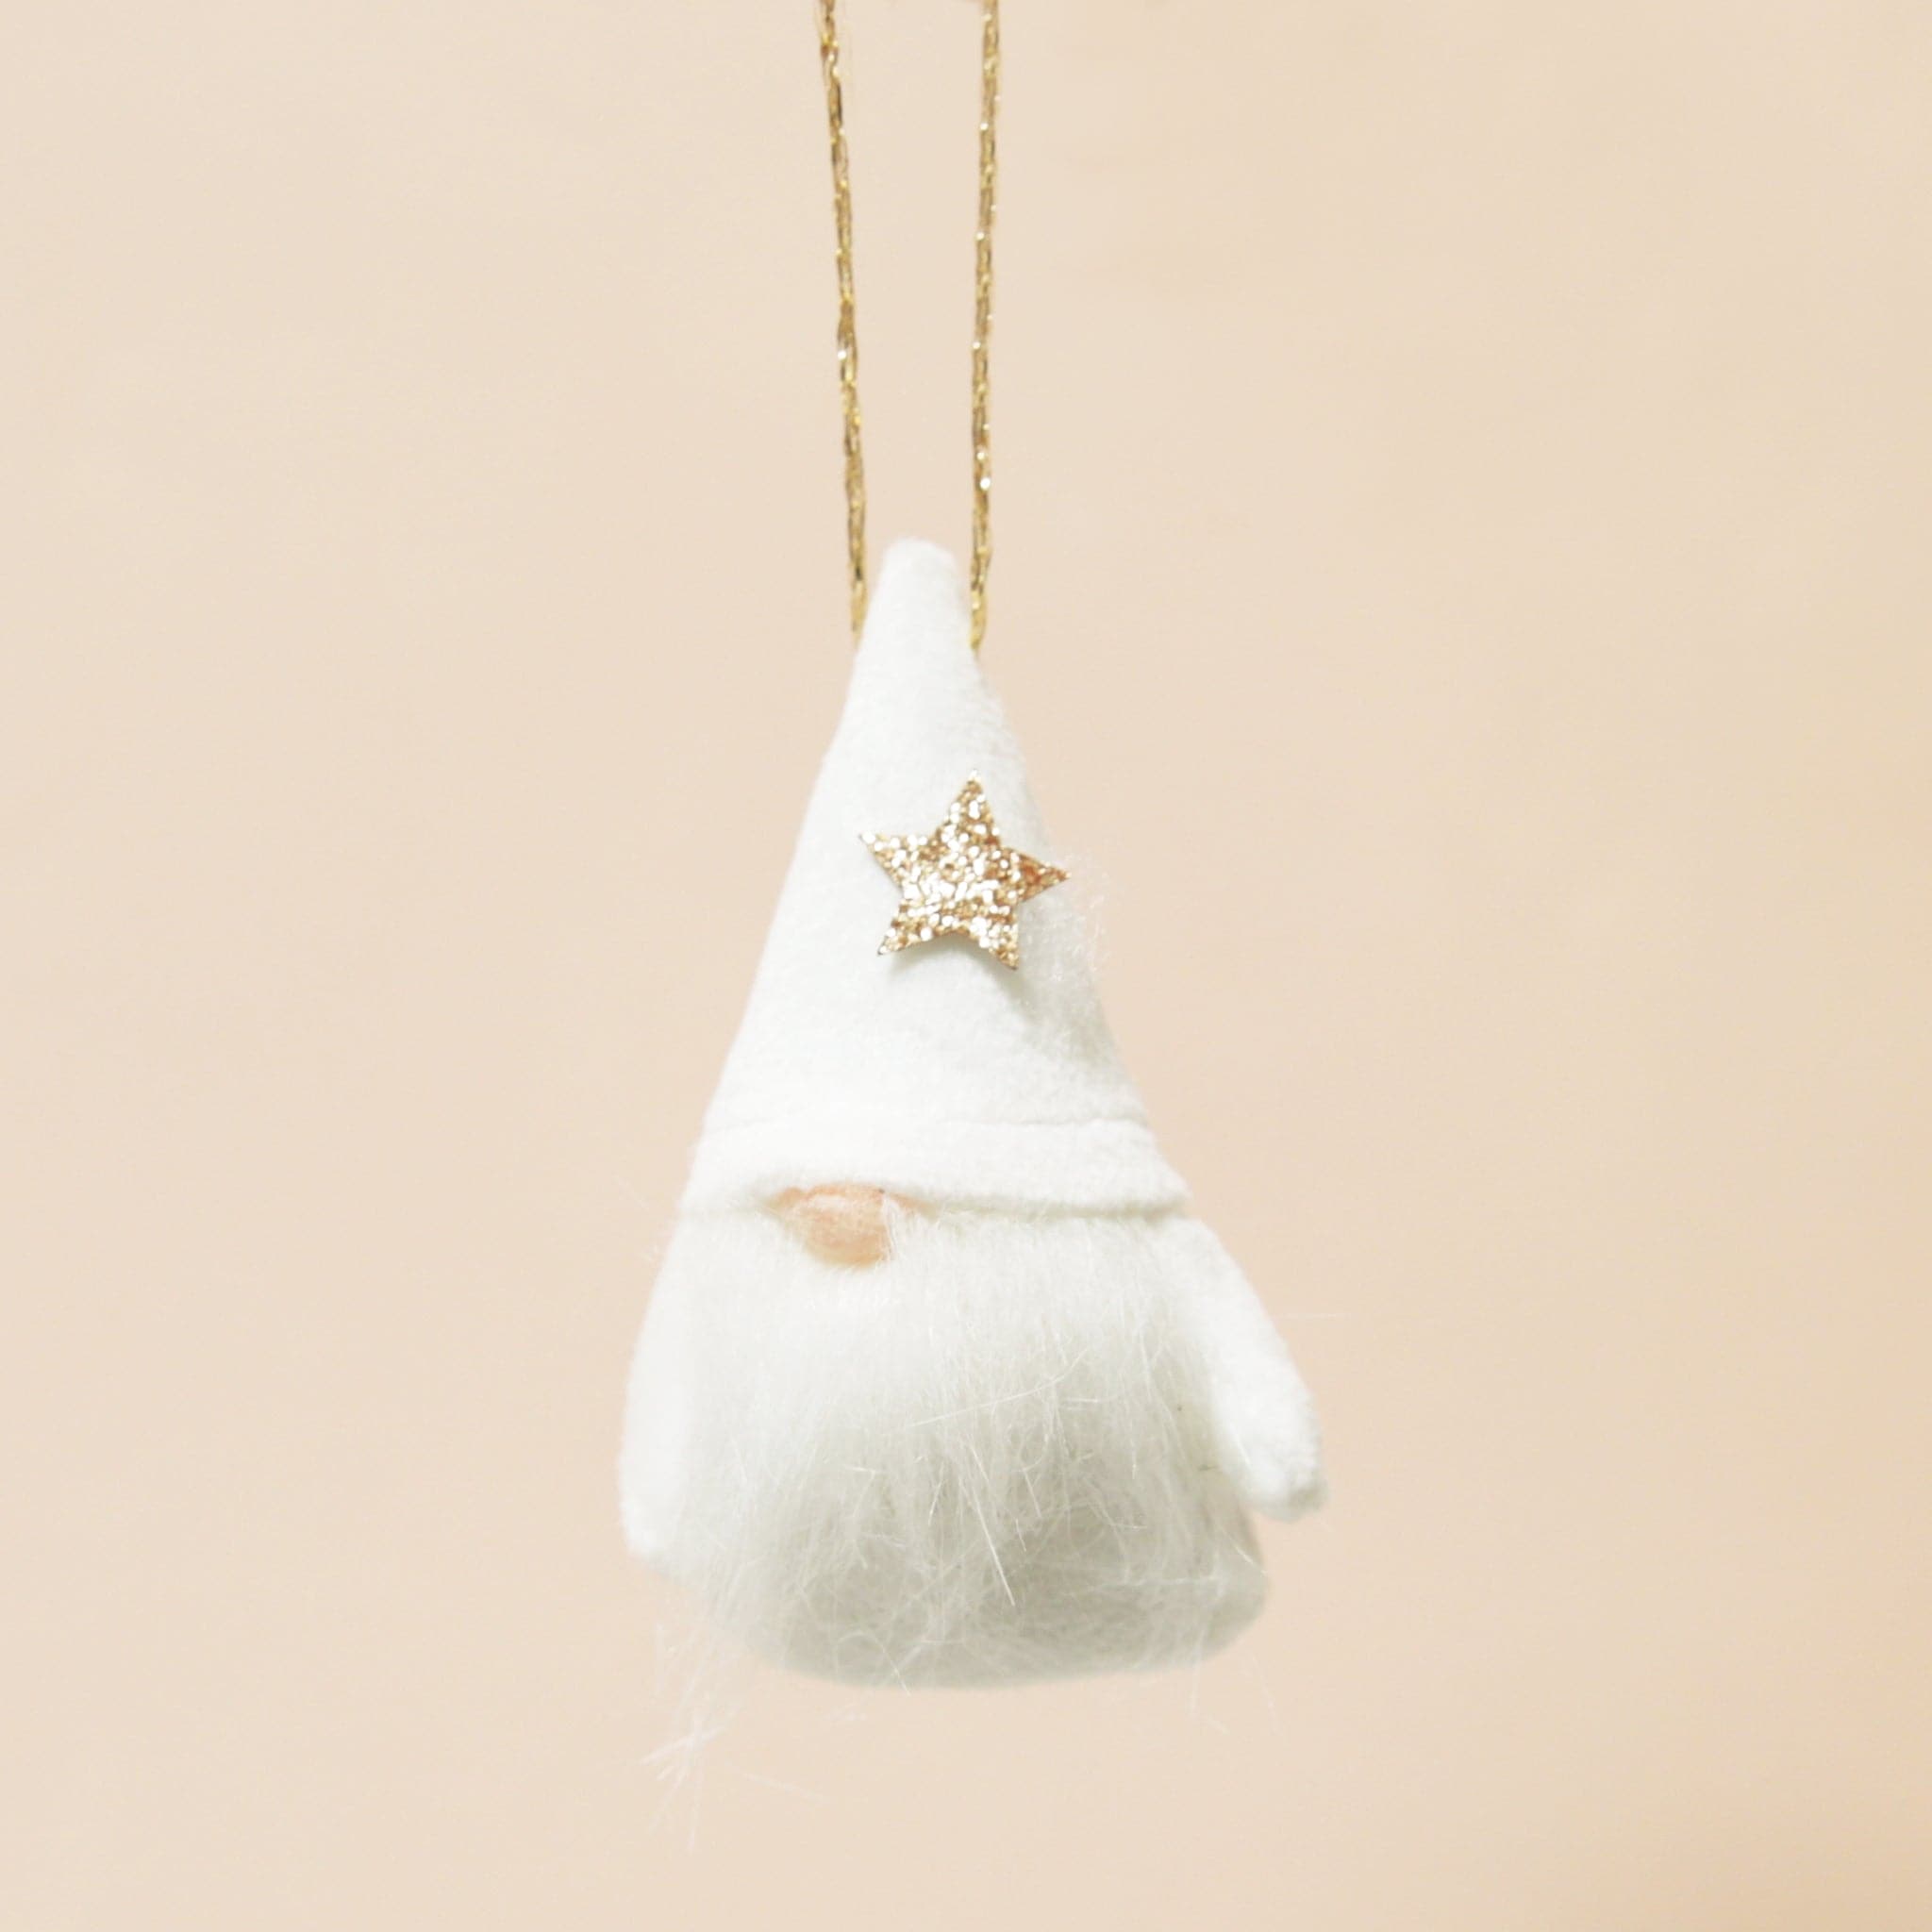 A plush white gnome ornament with a gold star and beard on a neutral ground.